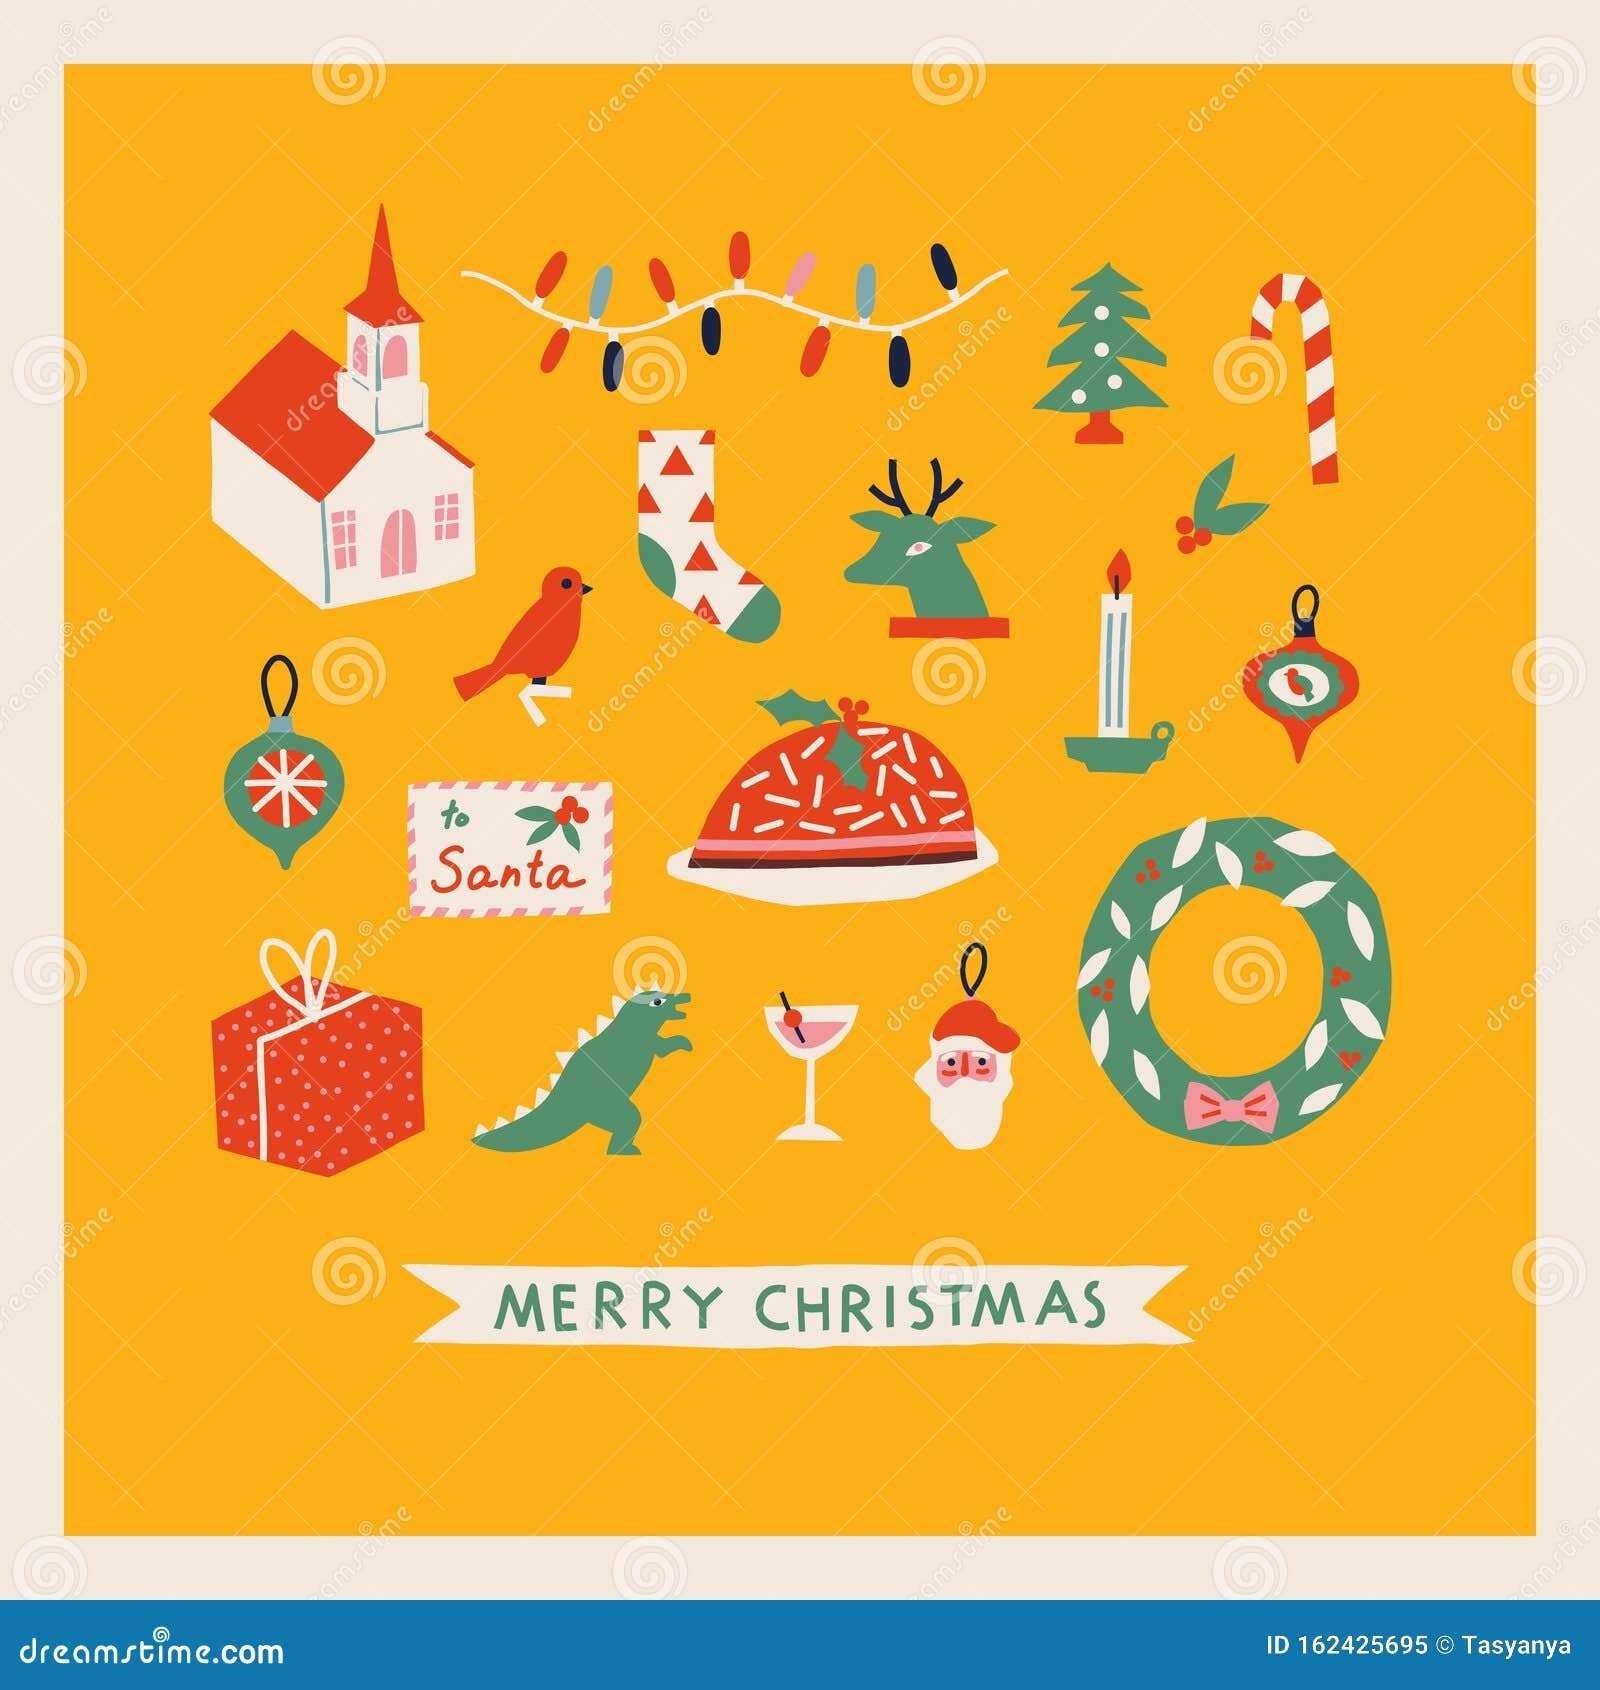 Merry Christmas Card or Poster Stock Vector - Illustration of holiday ...